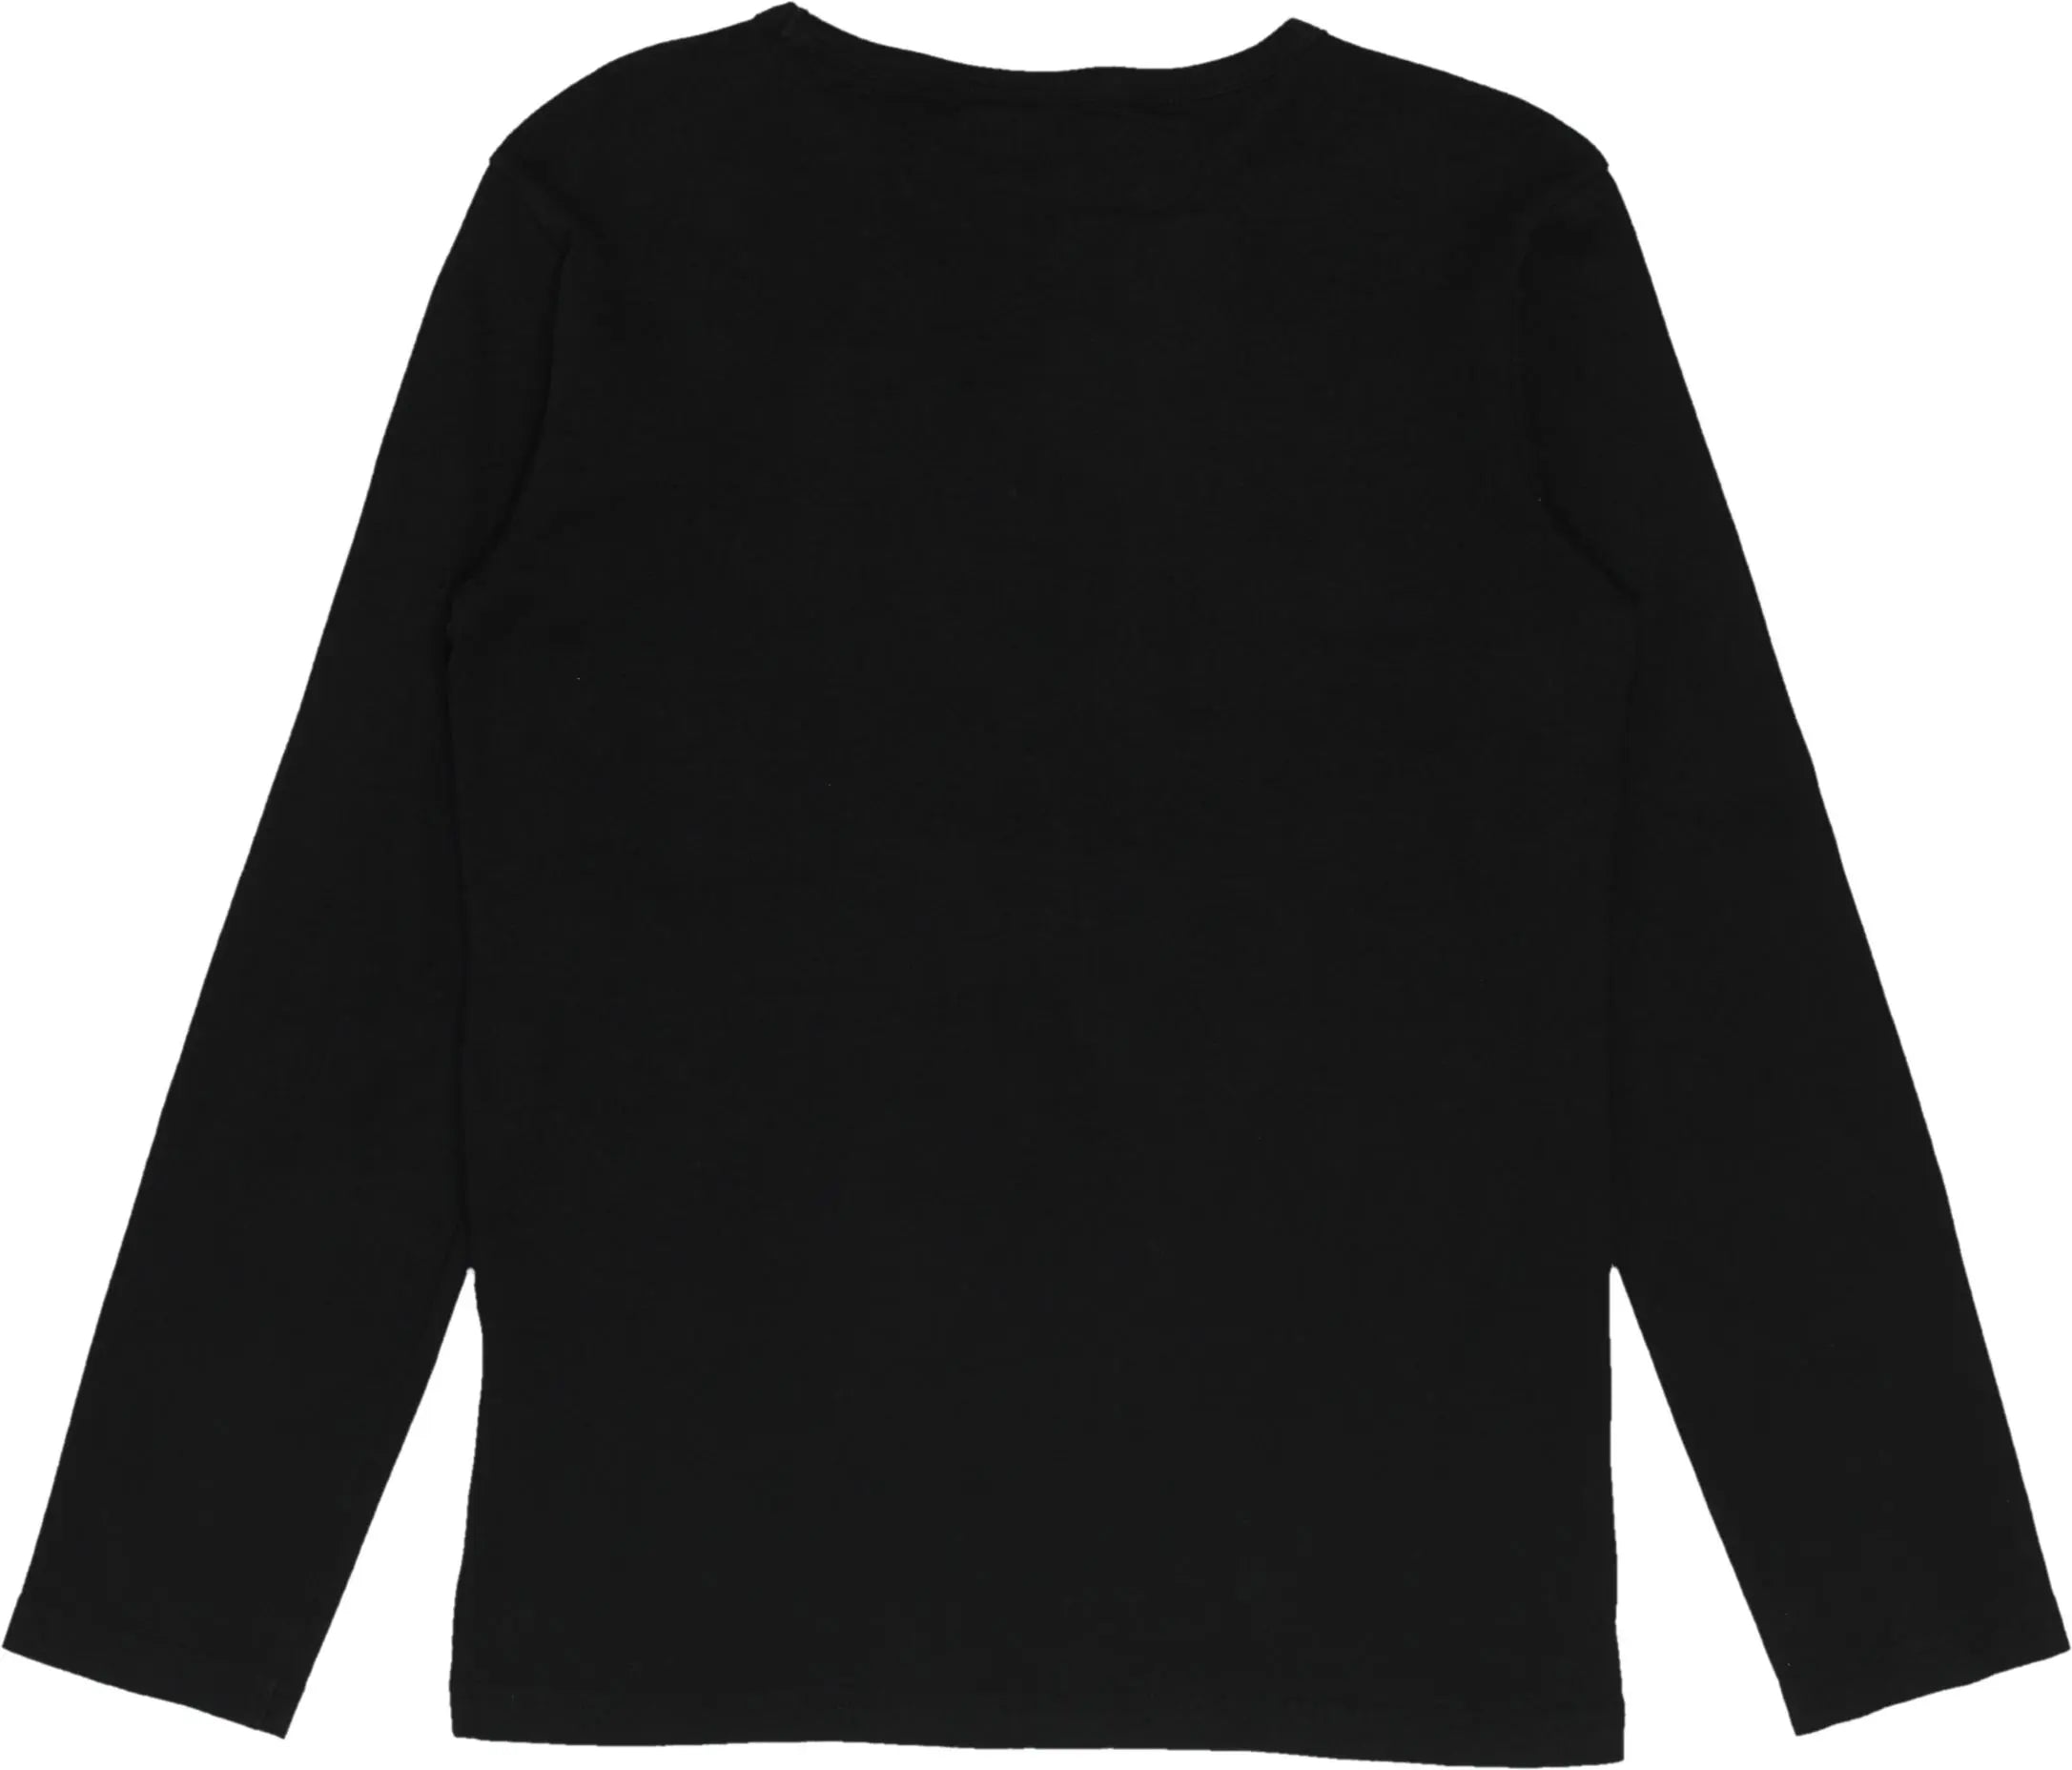 Europe Kids - Black Long Sleeve T-shirt- ThriftTale.com - Vintage and second handclothing